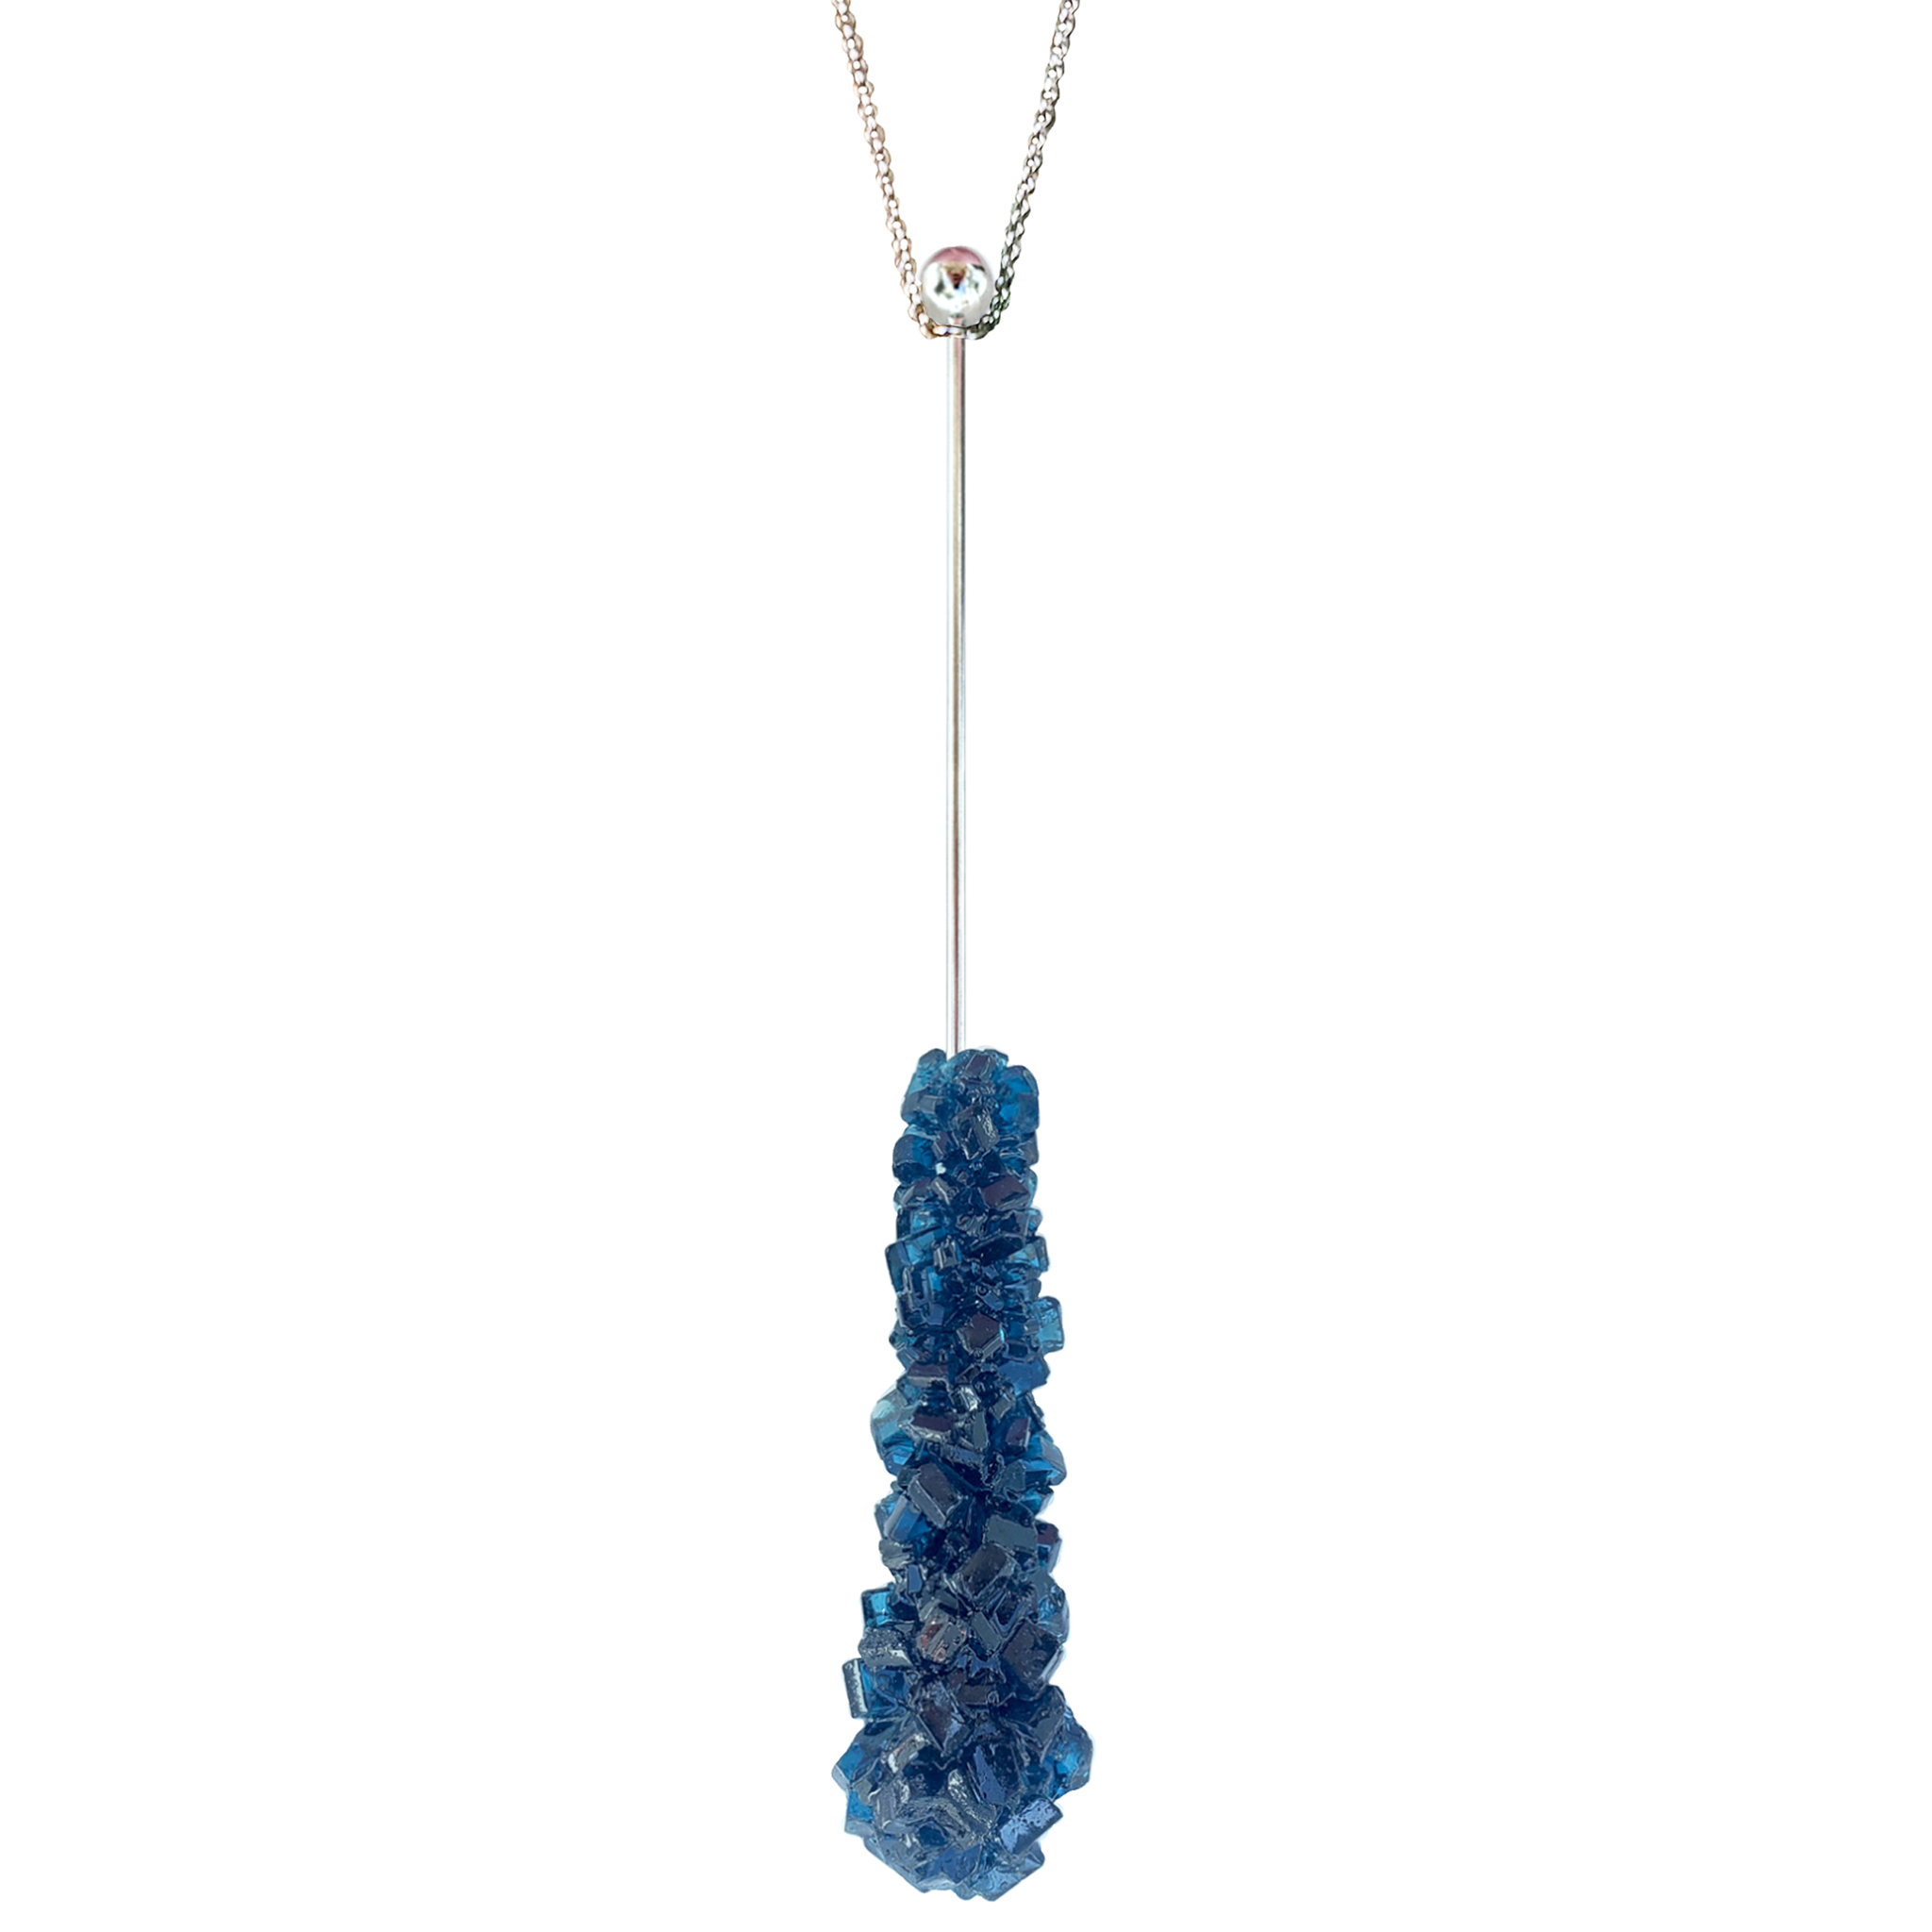 MIDNIGHT ROCK CANDY SWIZZLE STICK NECKLACE